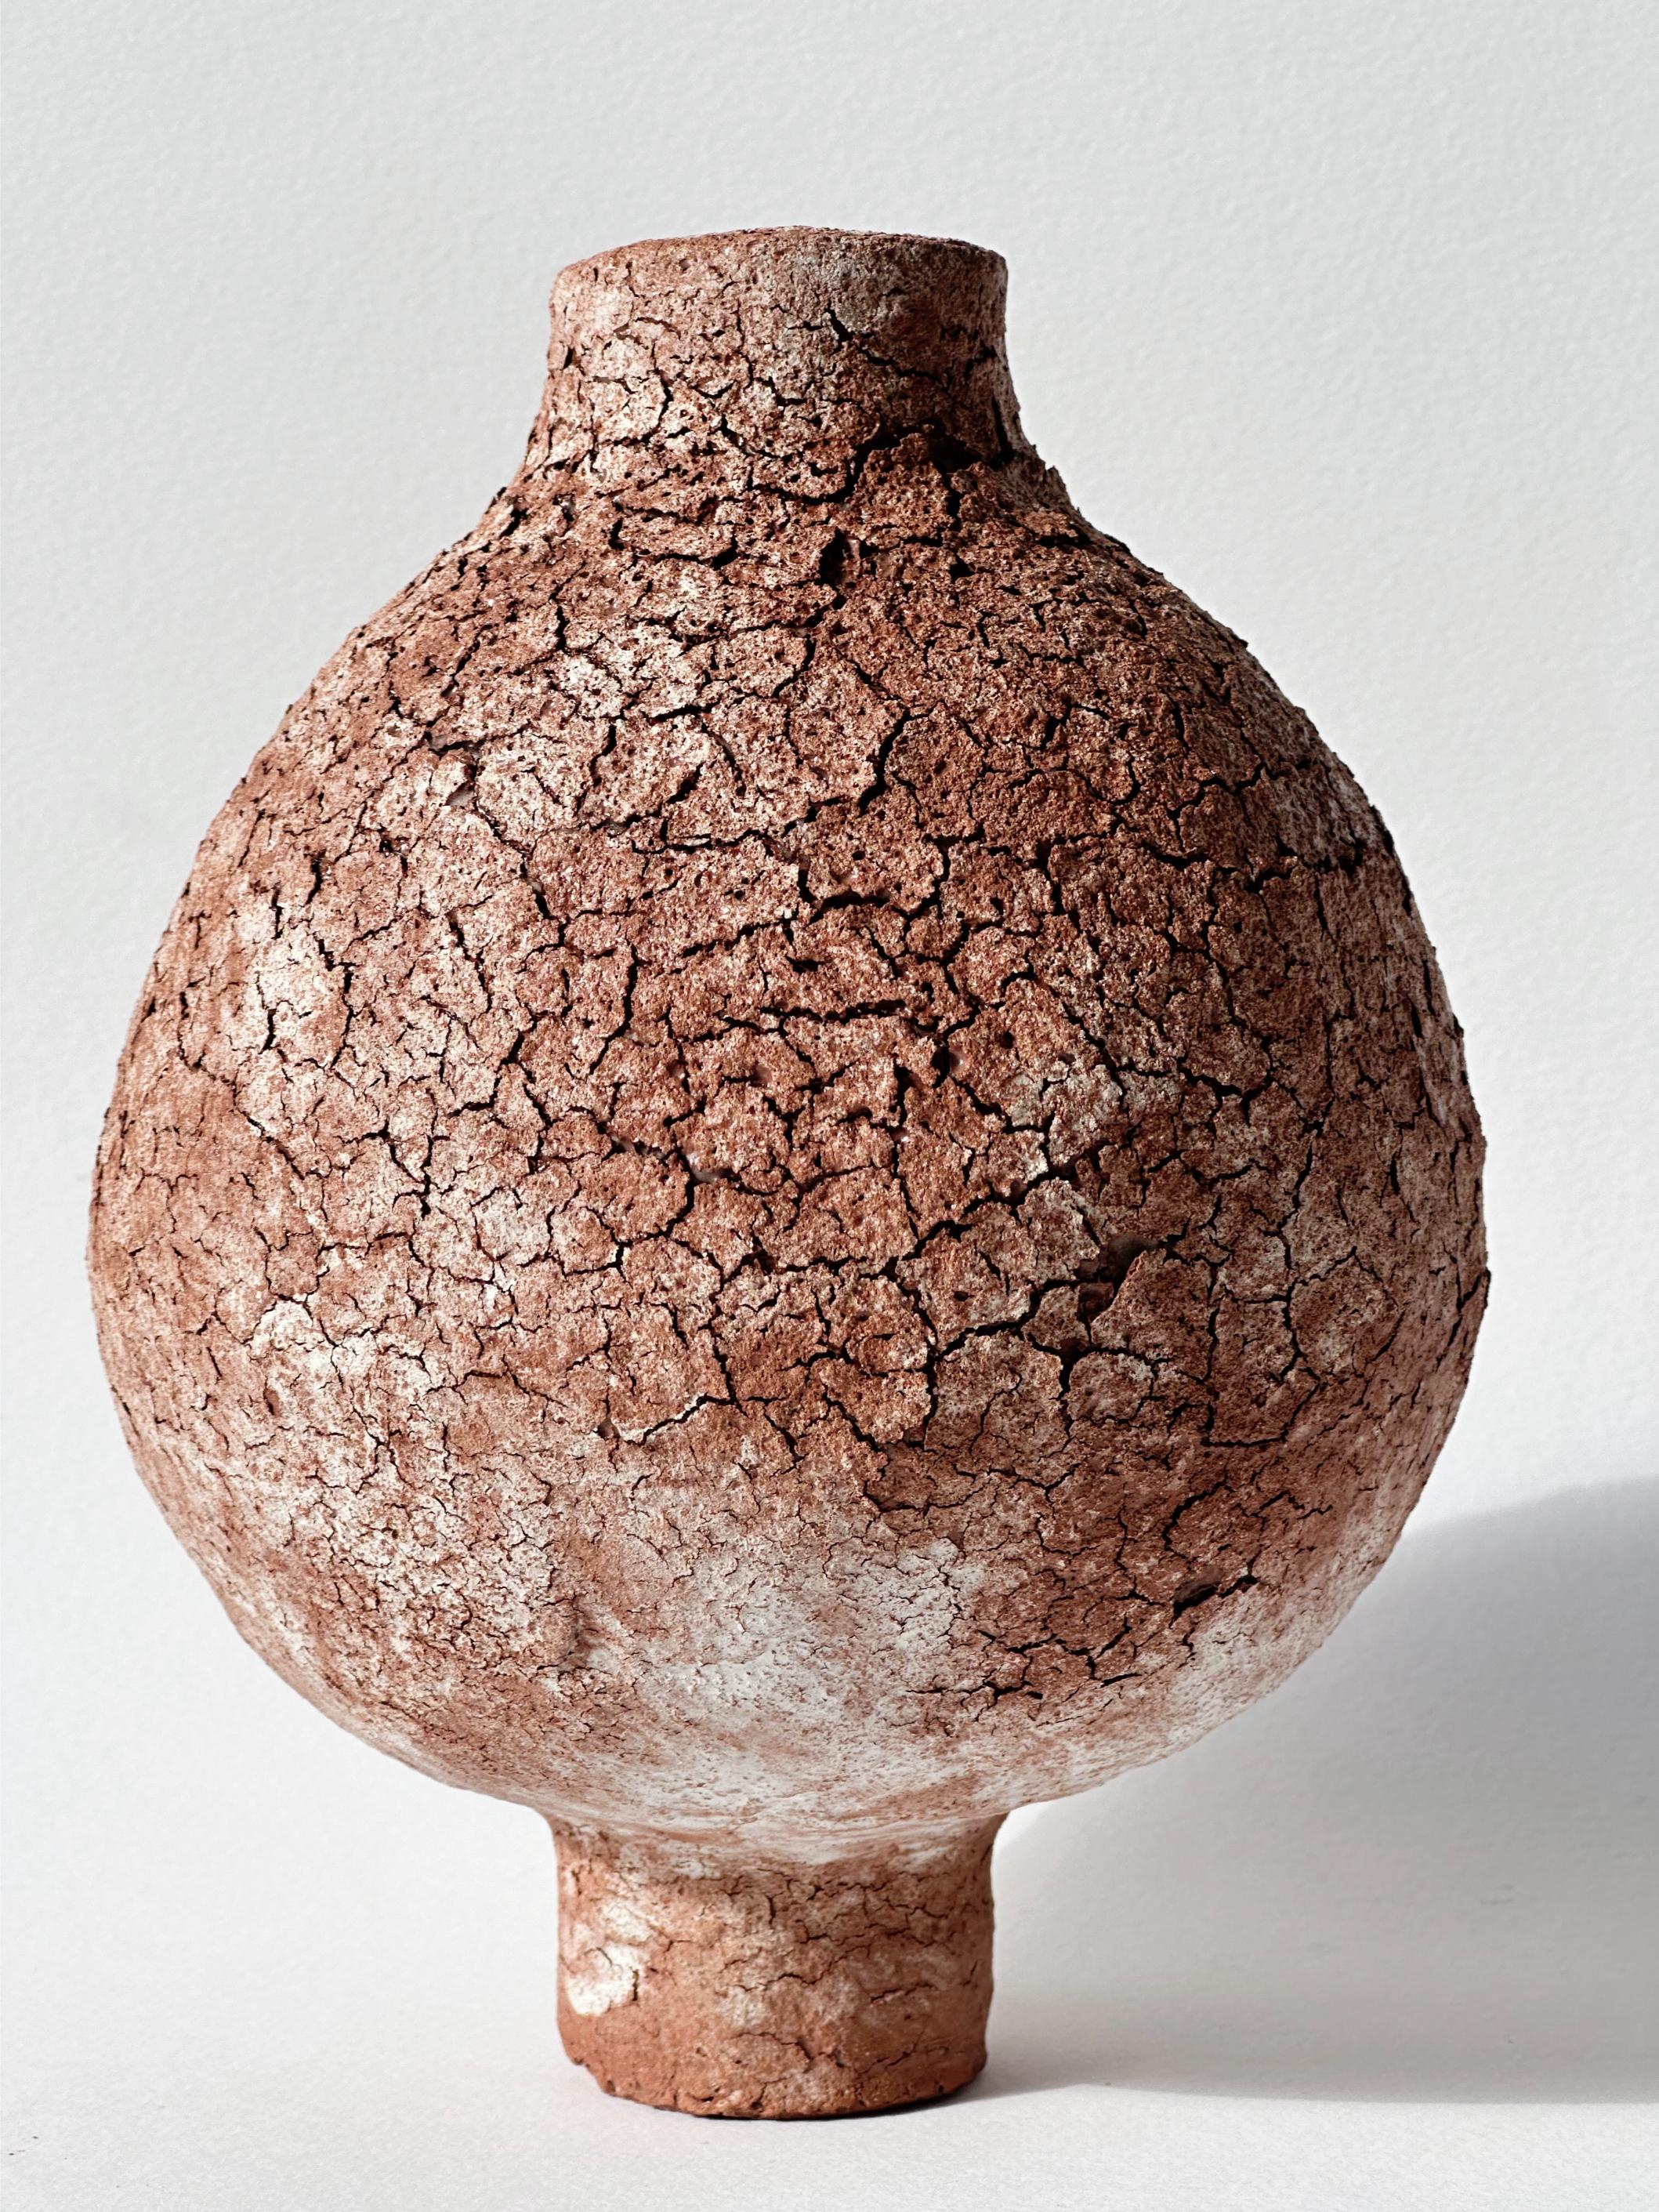 Terracotta Moon Jar No 9 by Elena Vasilantonaki
Unique
Dimensions: ⌀ 14 x H 18 cm (Dimensions may vary)
Materials: Local Terracotta Clay from the Island of
Crete

Growing up in Greece I was surrounded by pottery forms that have changed little since